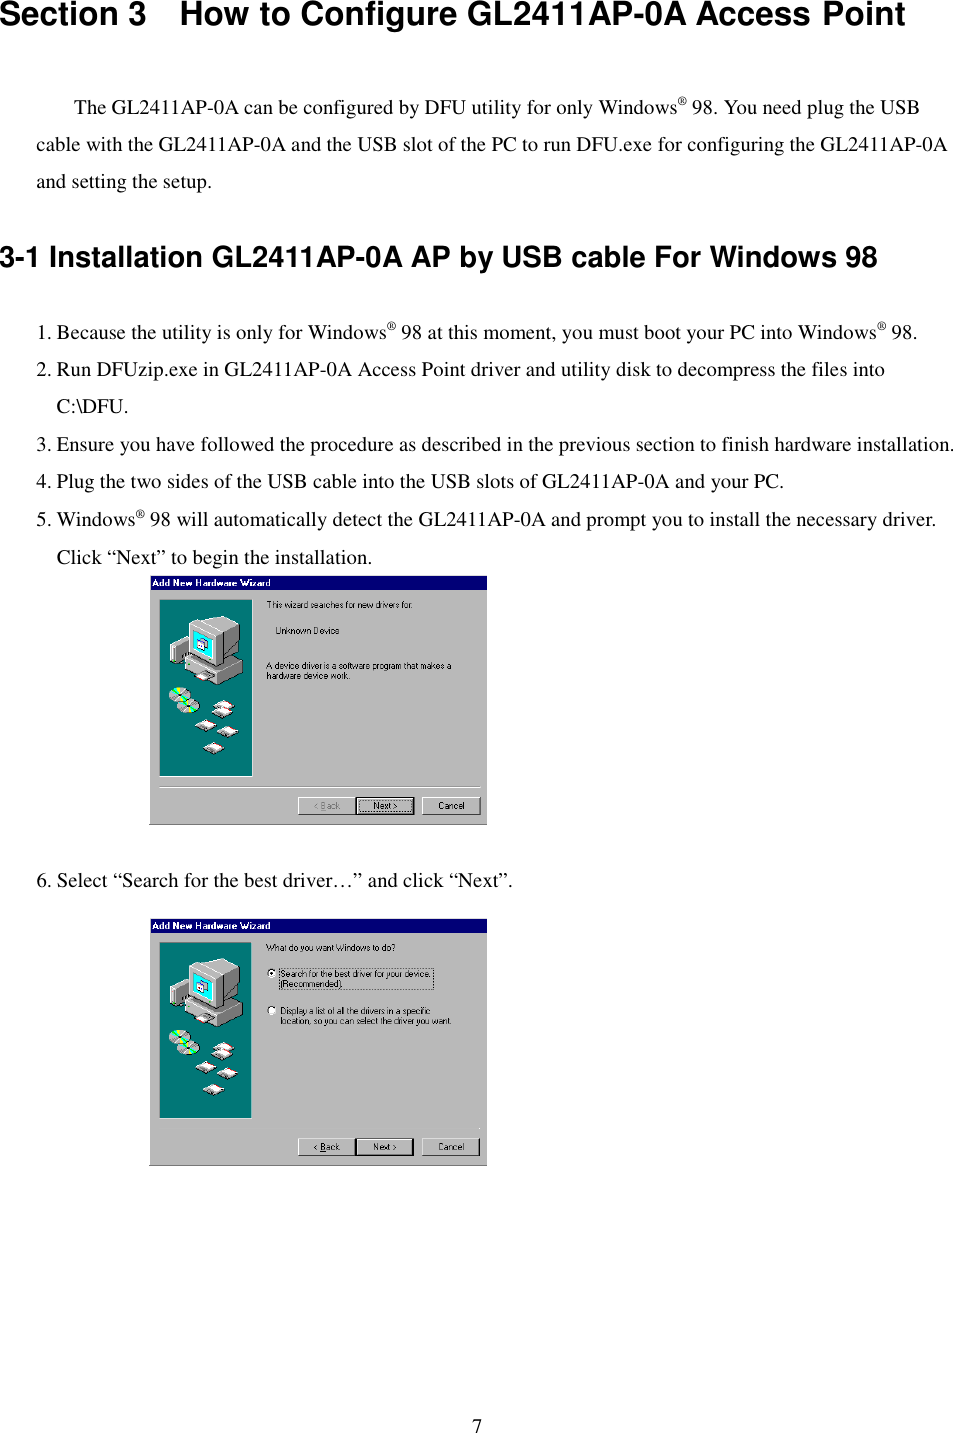 7Section 3    How to Configure GL2411AP-0A Access PointThe GL2411AP-0A can be configured by DFU utility for only Windows® 98. You need plug the USBcable with the GL2411AP-0A and the USB slot of the PC to run DFU.exe for configuring the GL2411AP-0Aand setting the setup.3-1 Installation GL2411AP-0A AP by USB cable For Windows 981. Because the utility is only for Windows® 98 at this moment, you must boot your PC into Windows® 98.2. Run DFUzip.exe in GL2411AP-0A Access Point driver and utility disk to decompress the files intoC:\DFU.3. Ensure you have followed the procedure as described in the previous section to finish hardware installation.4. Plug the two sides of the USB cable into the USB slots of GL2411AP-0A and your PC.5. Windows® 98 will automatically detect the GL2411AP-0A and prompt you to install the necessary driver.Click “Next” to begin the installation.6. Select “Search for the best driver…” and click “Next”.